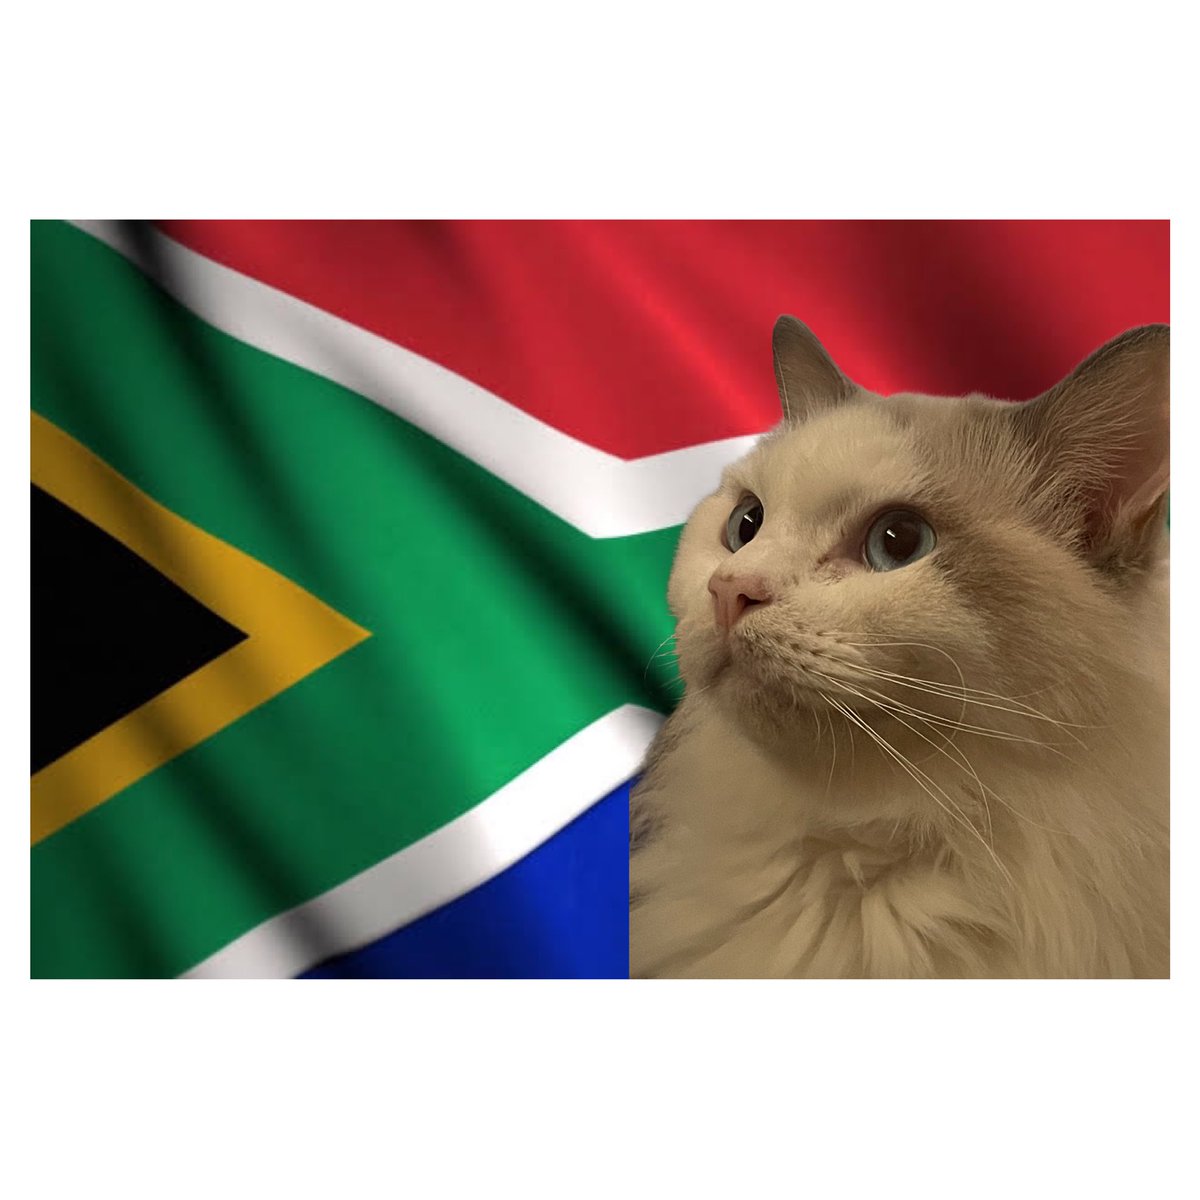 It is with deep pride that i announce that cheshire of the CP will run for president in the  next  #sa election. Along with a socialist policy agenda(that ignores dogs), there will be an enforced every house has a cat rule, & royal canine parcels ery month! #Halala #Mzansi voteCP